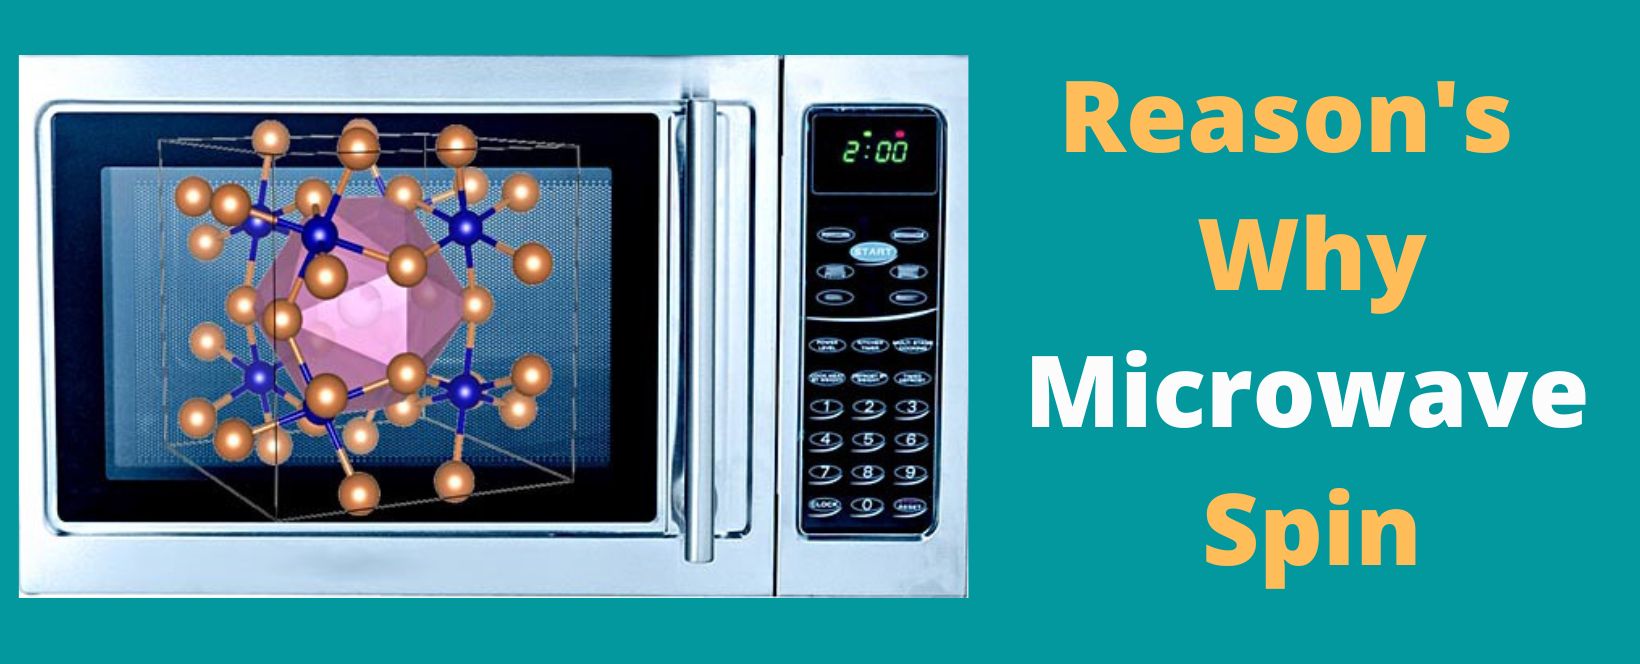 Reason's Why Microwave Spin